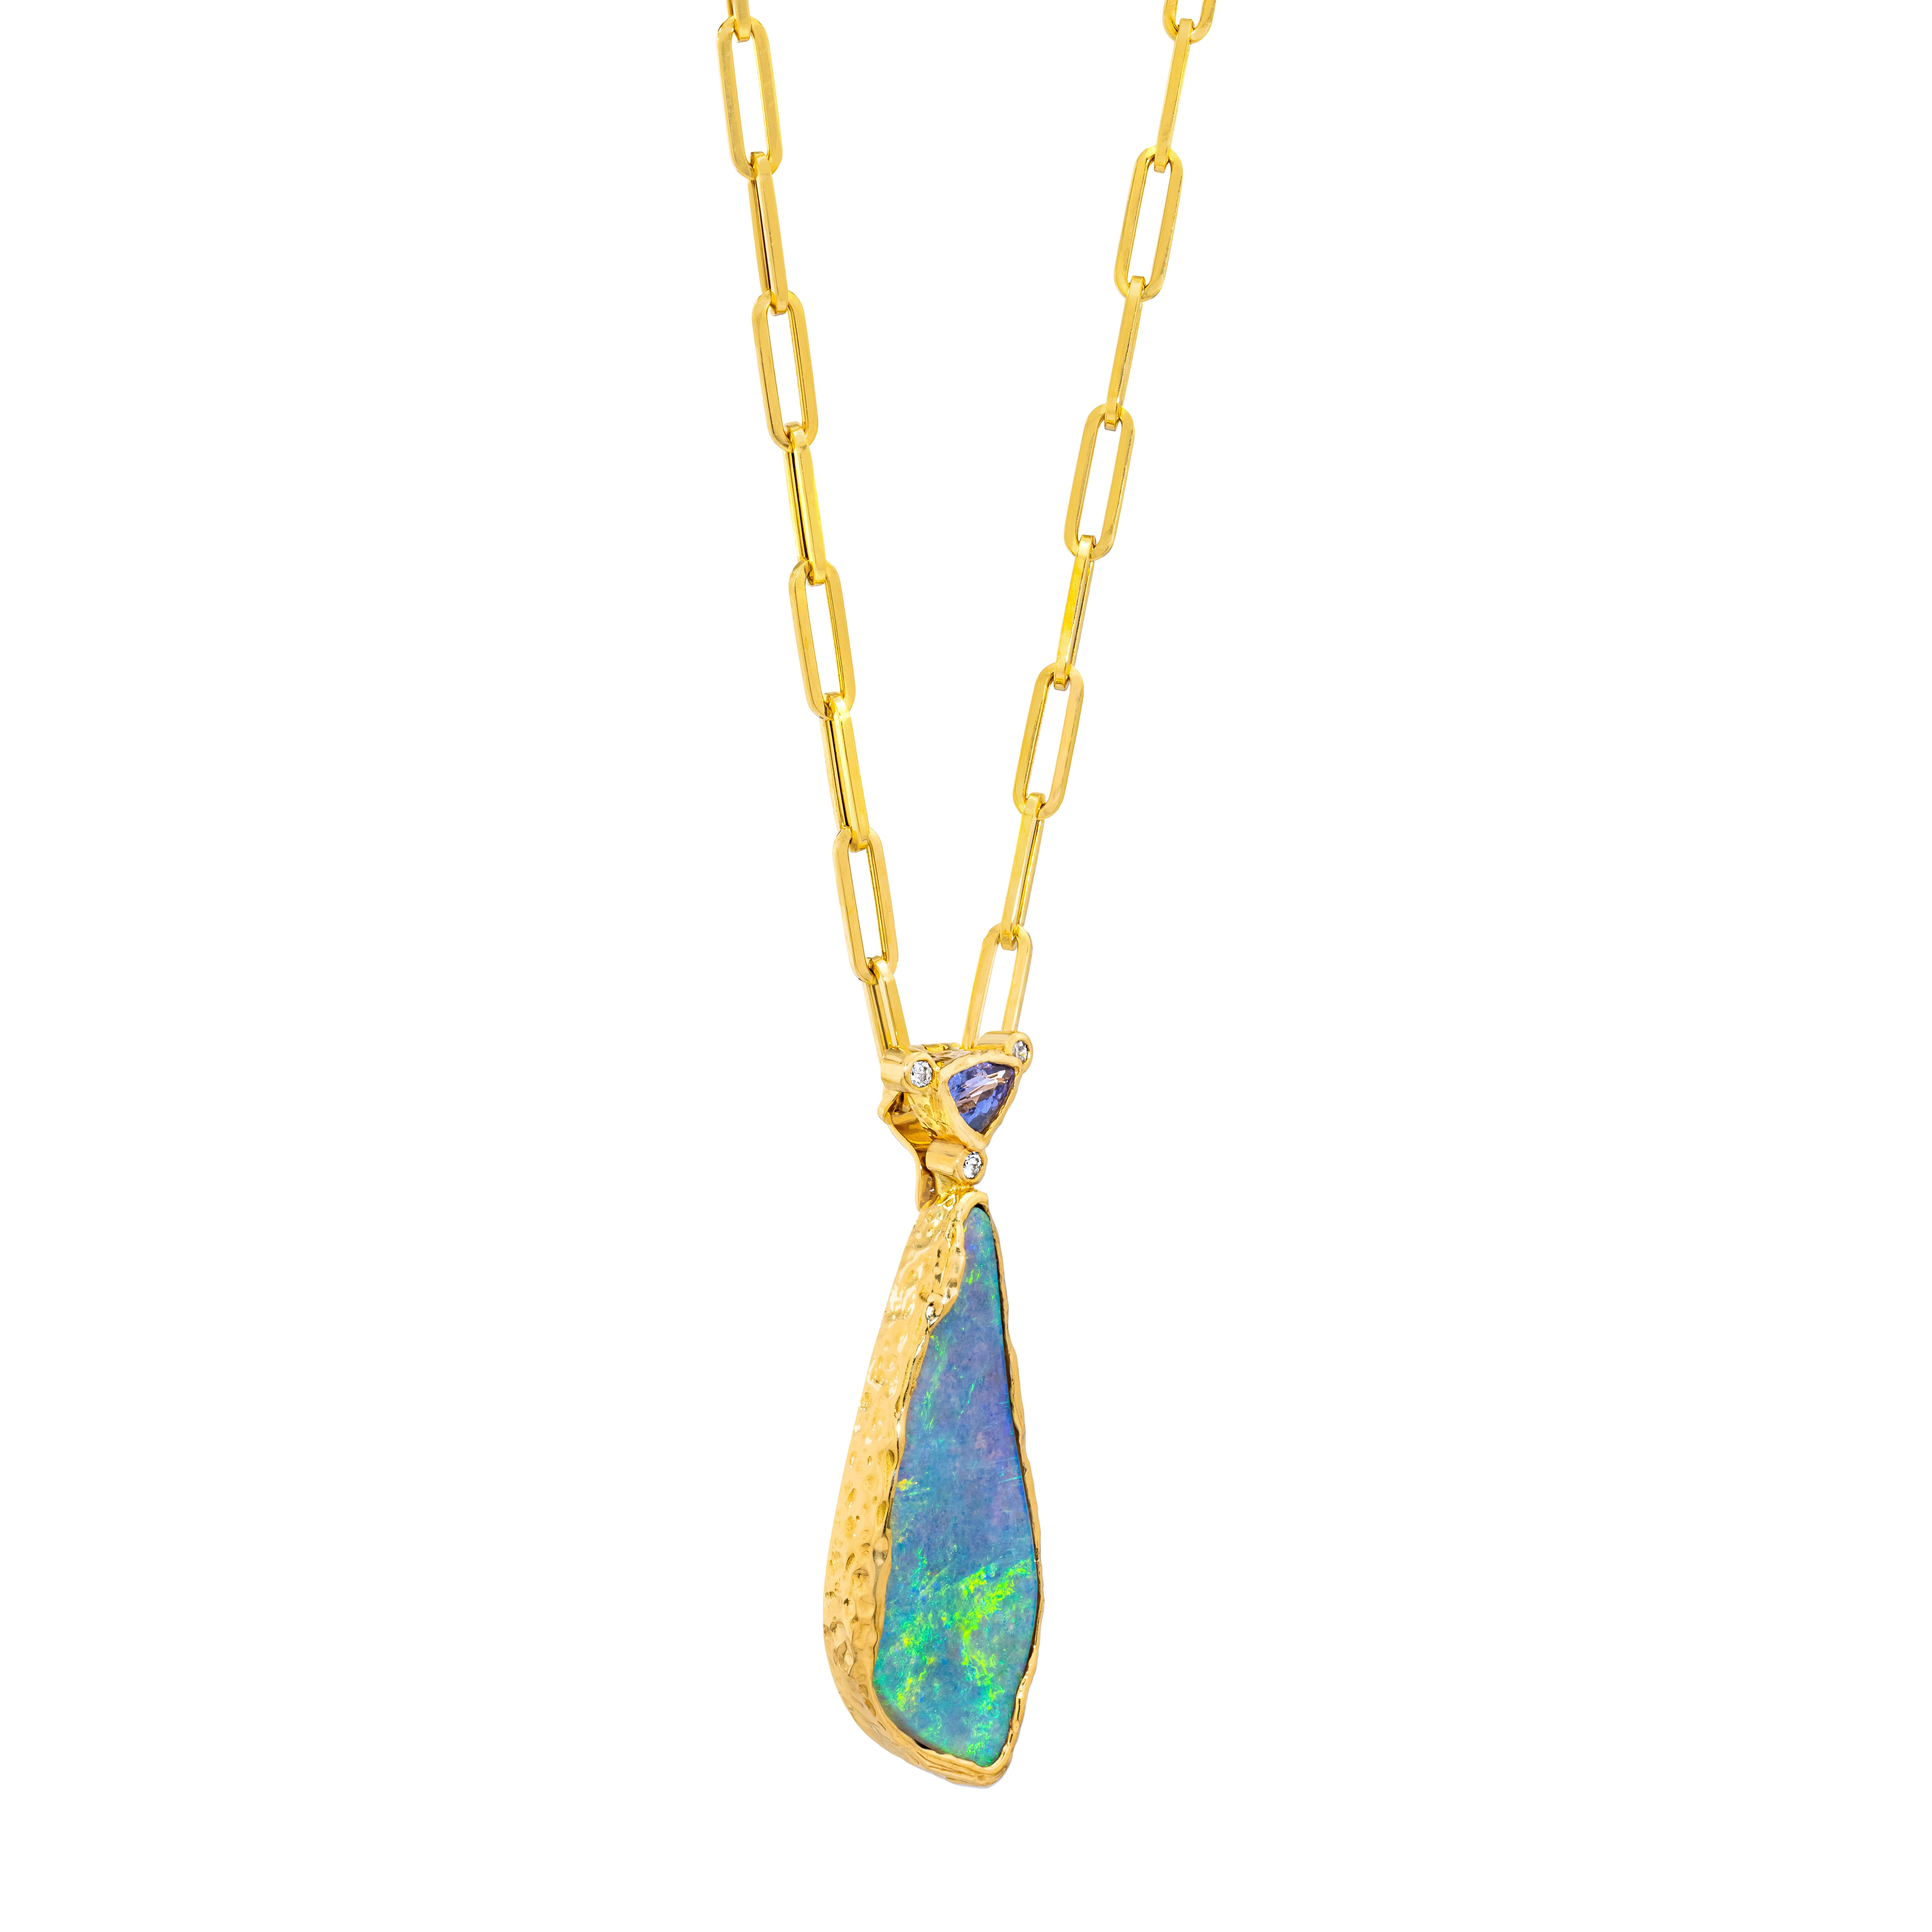 What a beautiful one-of-kind piece!  The freeform Australian Boulder Opal displays incredible flashes of green and blue with undertones of orange and red.  The Opal is enrobed in 18 Karat Gold with an organic soft feeling.  The Trillion-shaped